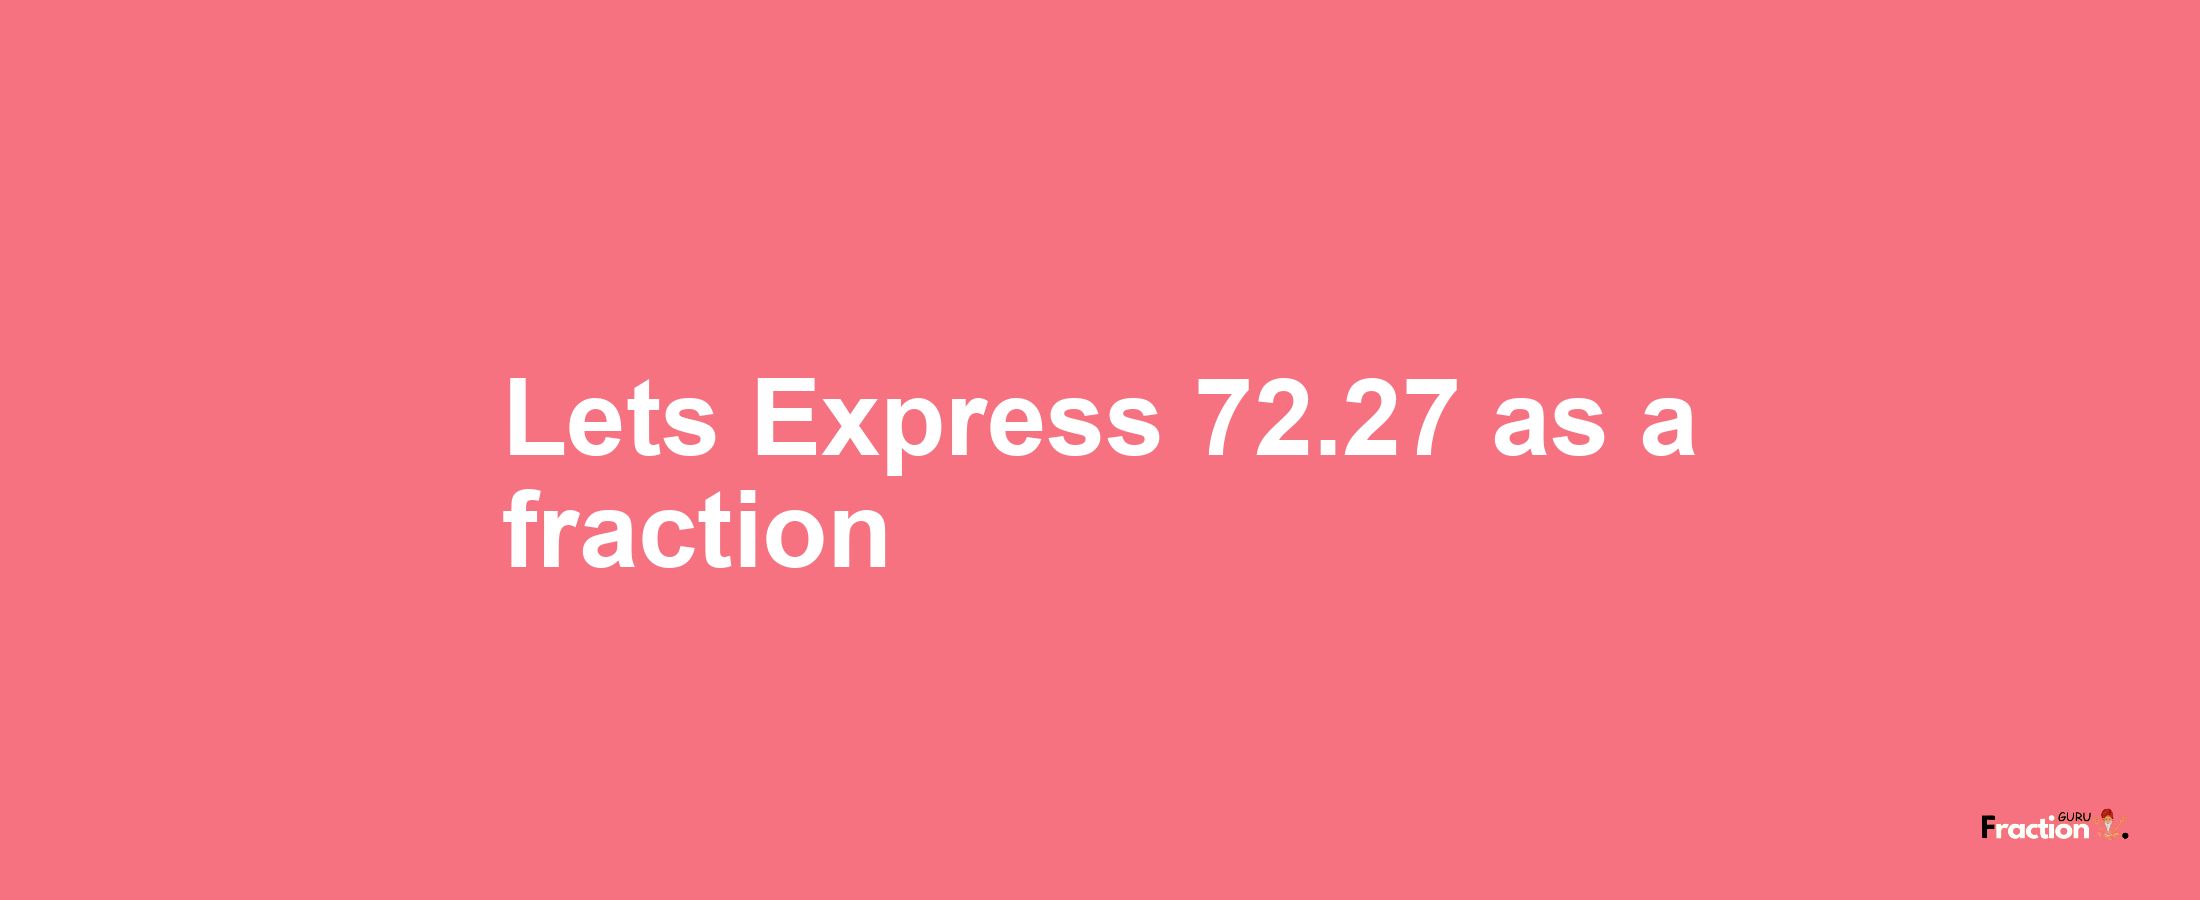 Lets Express 72.27 as afraction